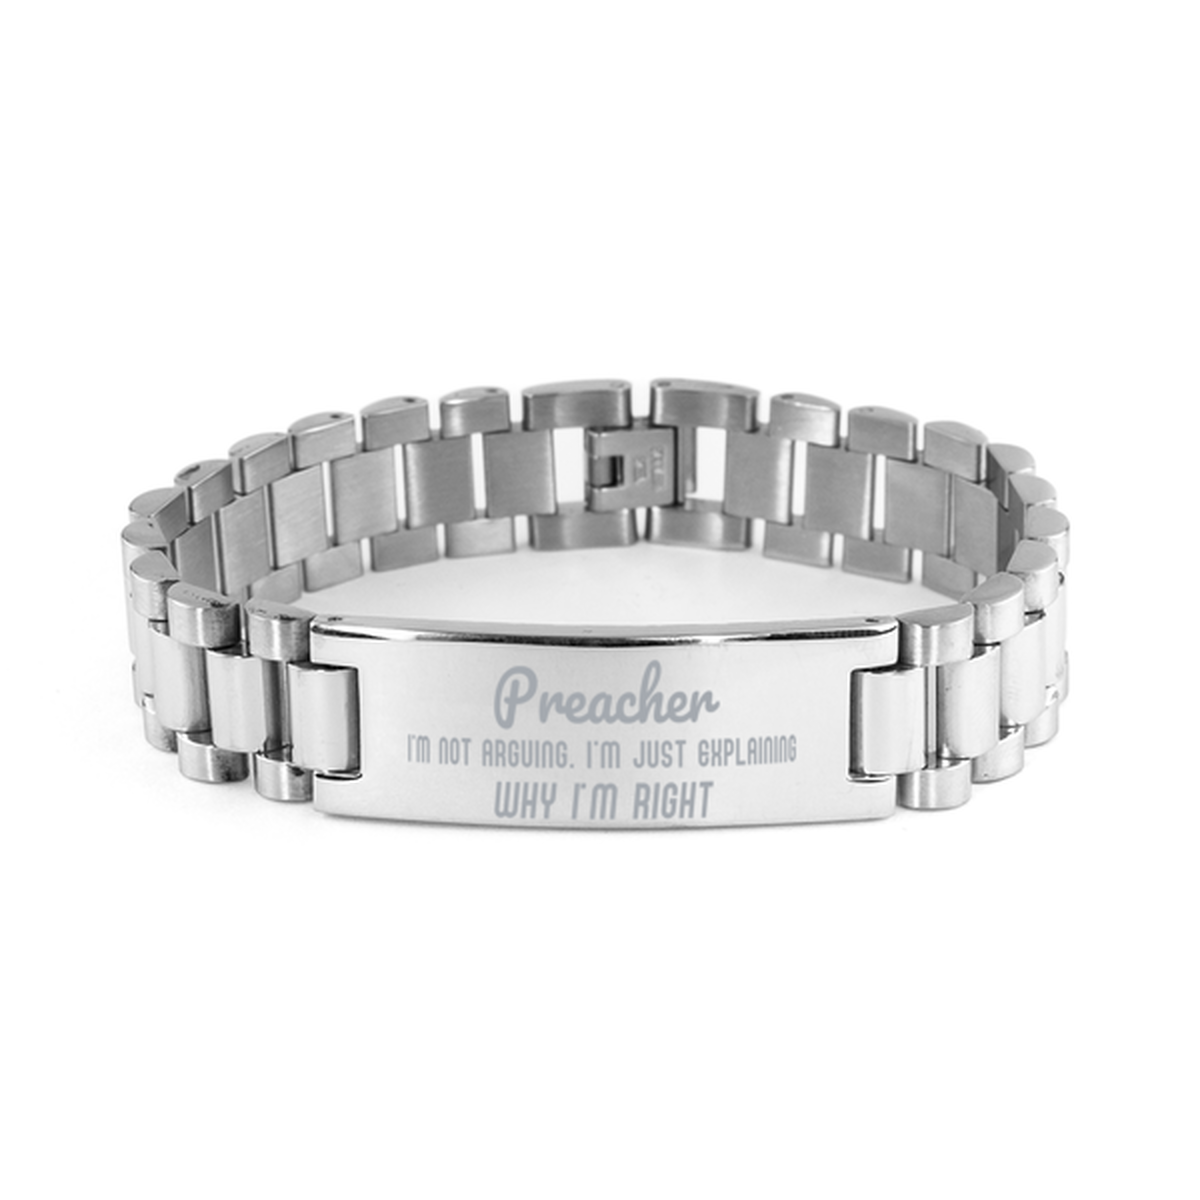 Preacher I'm not Arguing. I'm Just Explaining Why I'm RIGHT Ladder Stainless Steel Bracelet, Graduation Birthday Christmas Preacher Gifts For Preacher Funny Saying Quote Present for Men Women Coworker